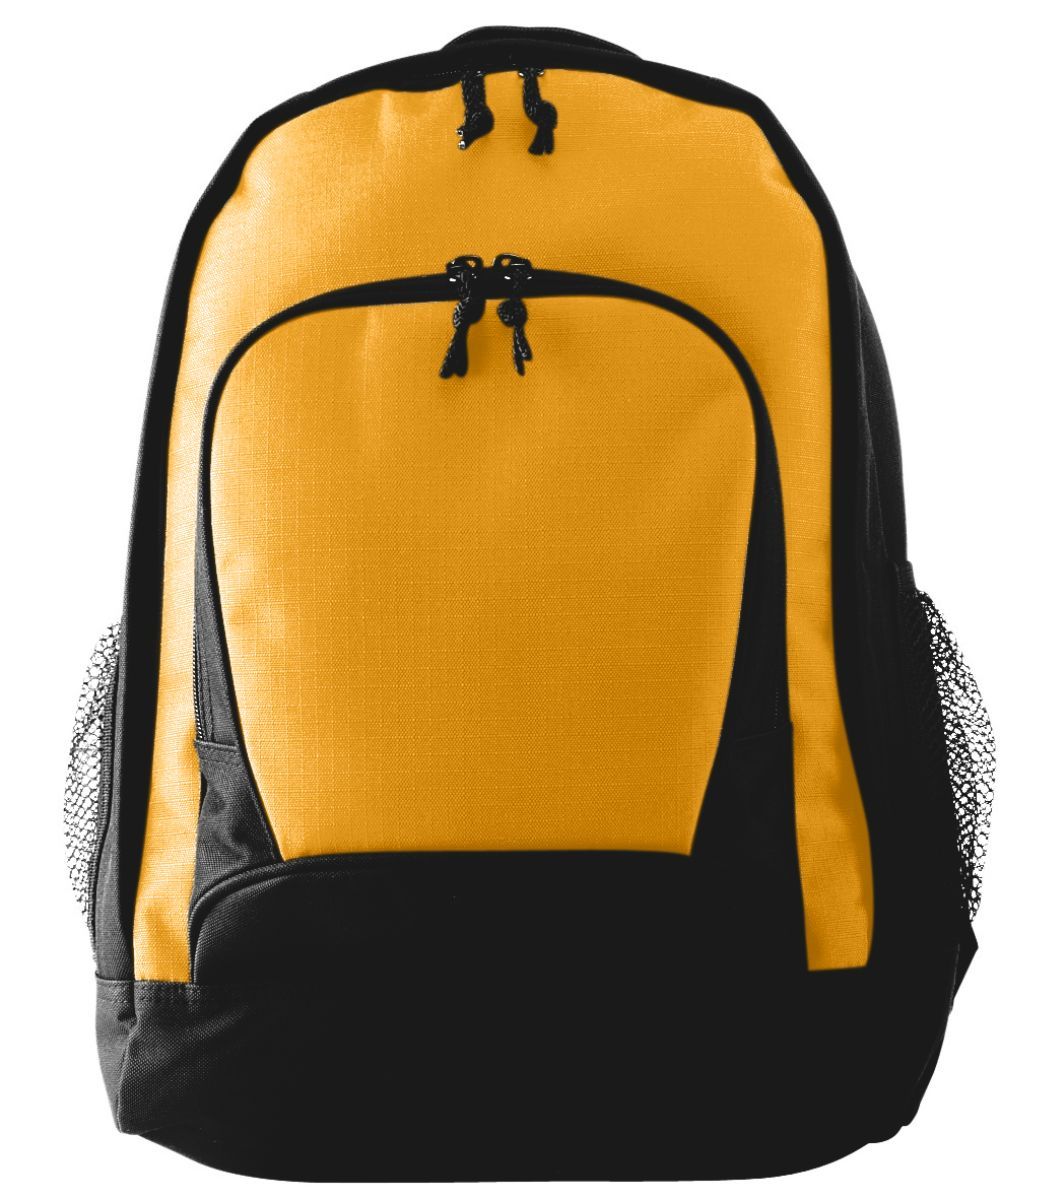 Ripstop Backpack - 1710